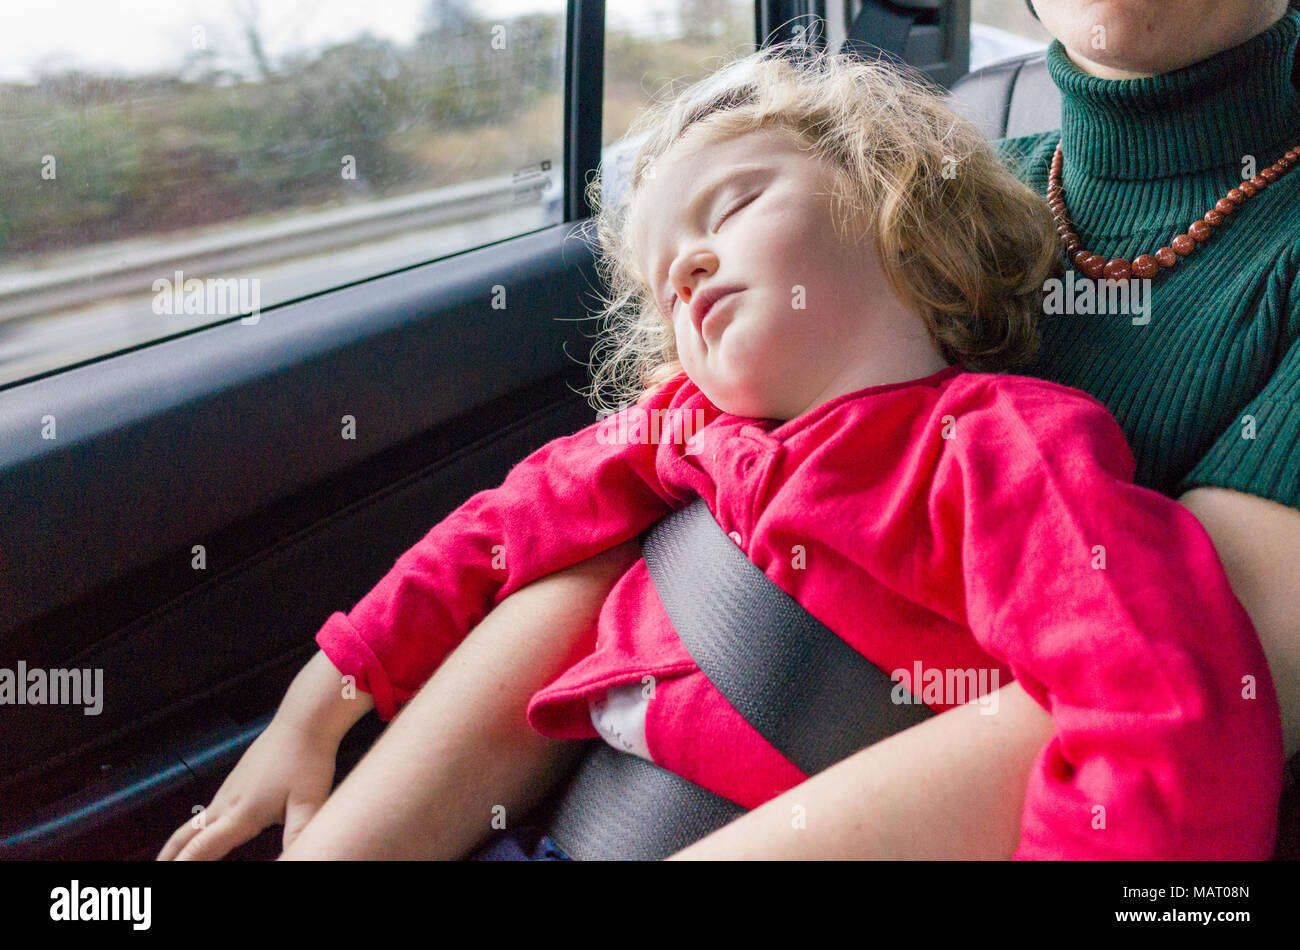 Sleeping two year old child riding in back seat of car on mother's lap using seat belt, UK Stock Photo